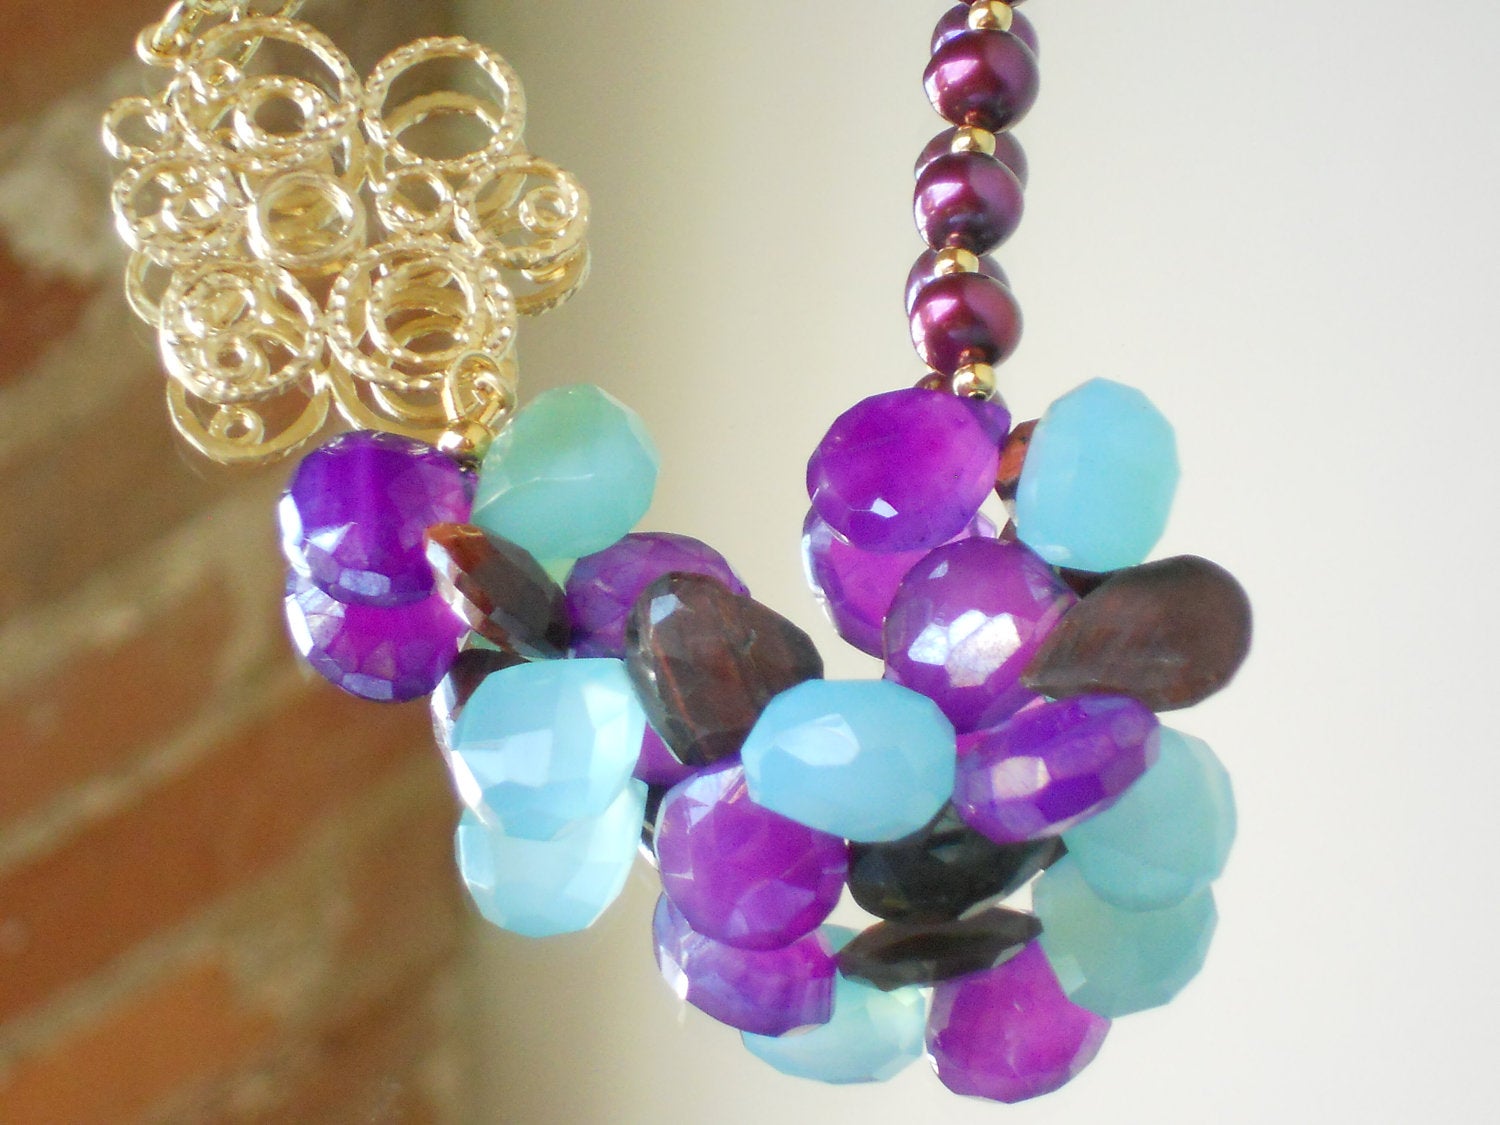 Peruvian Blue Chalcedony and Mystic Amethyst Chalcedony Freshwater Pearl Necklace, Grapes & Grace Dujour